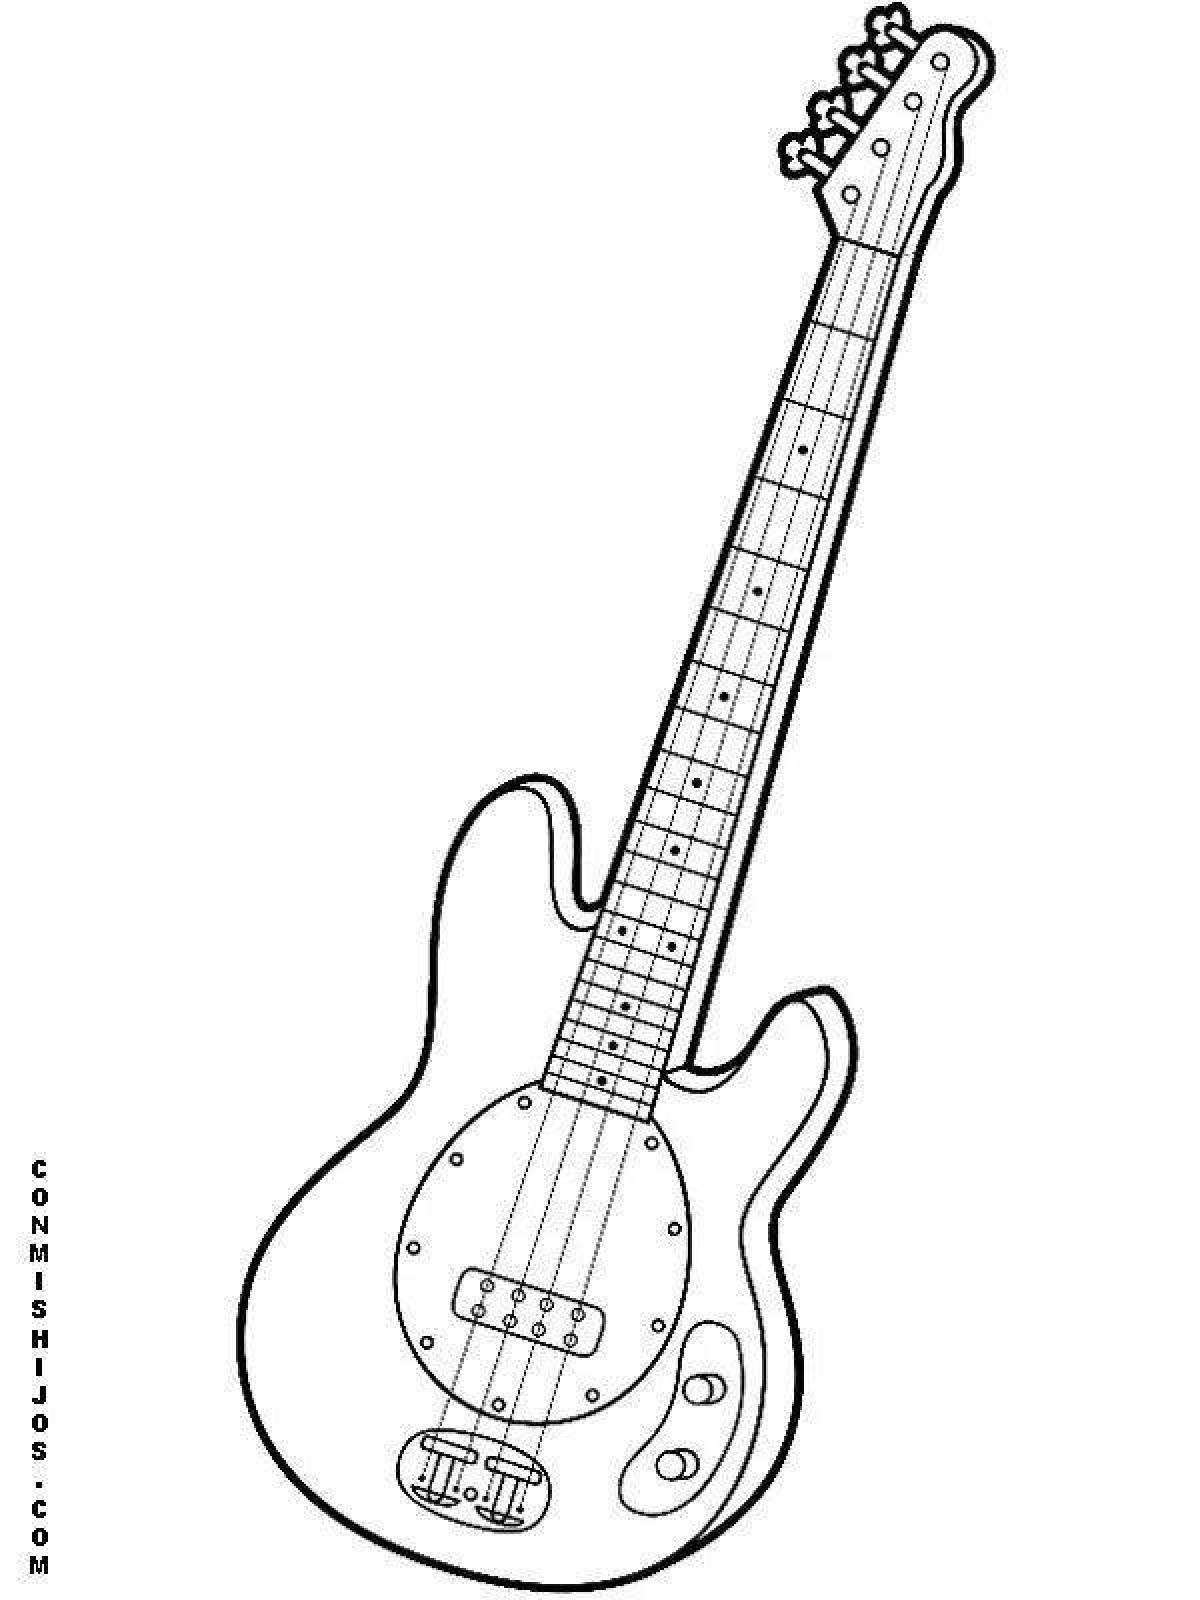 Coloring page with amazing electric guitar